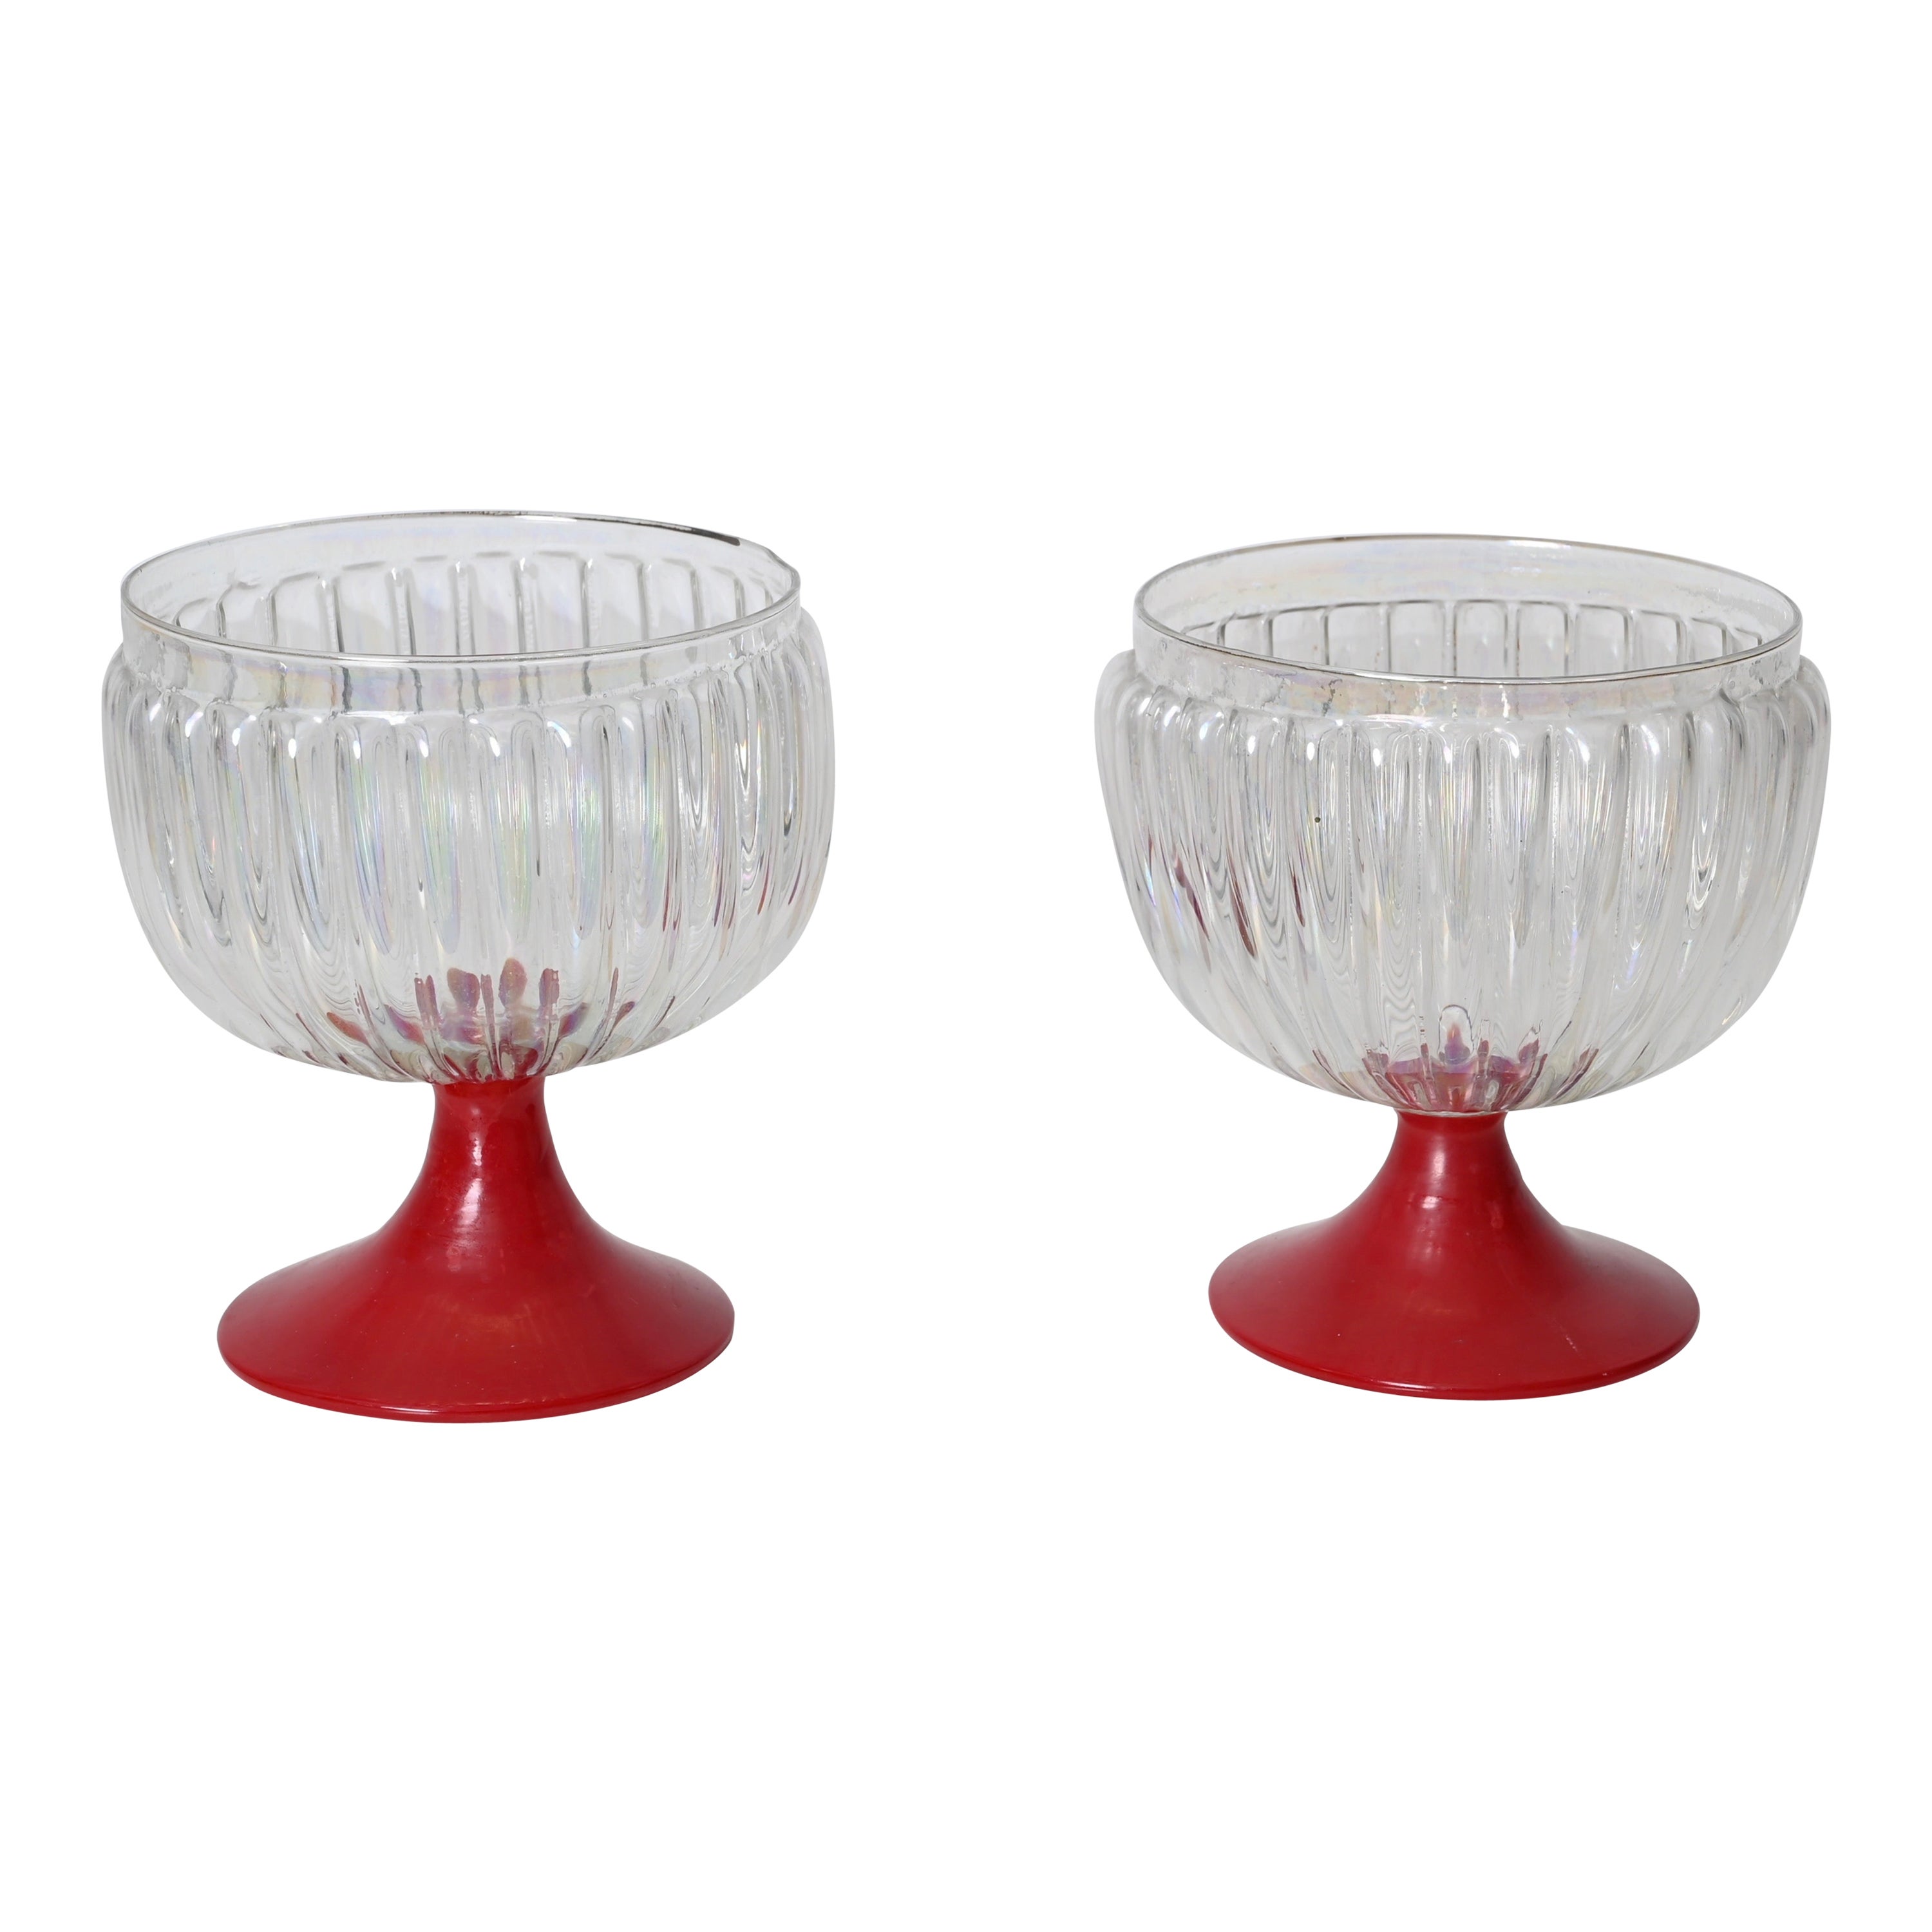 Pair of Large Decorative Murano Red and Iridescent Goblet Glasses, Italy 1940s